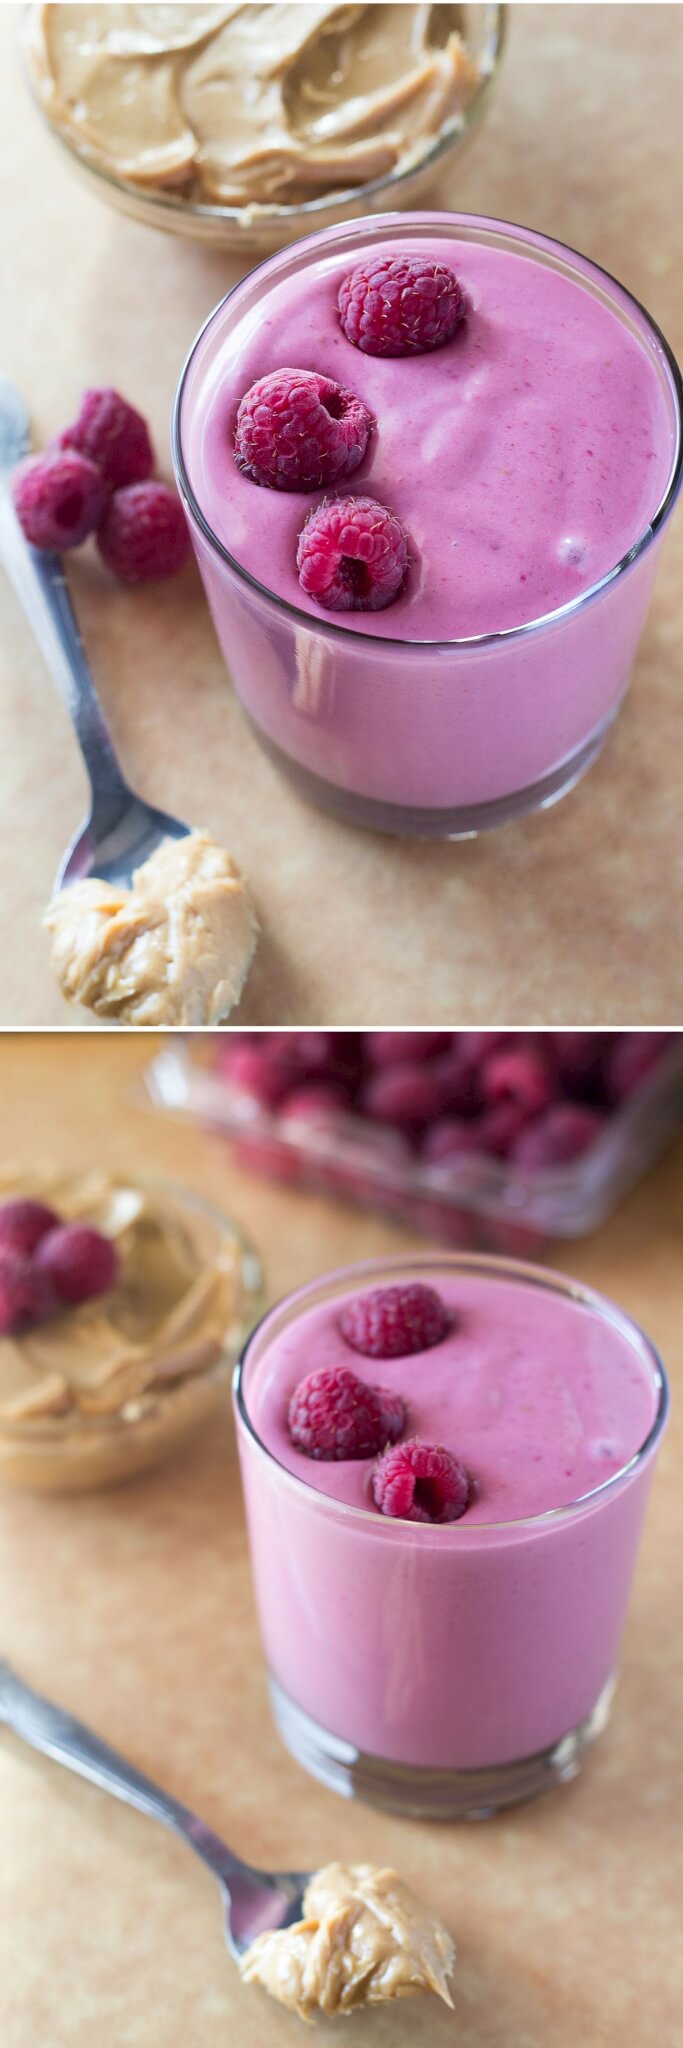 Peanut Butter & Raspberry Jelly in delicious smoothie form! Plus it's dairy free, vegan & has no refined sugars!